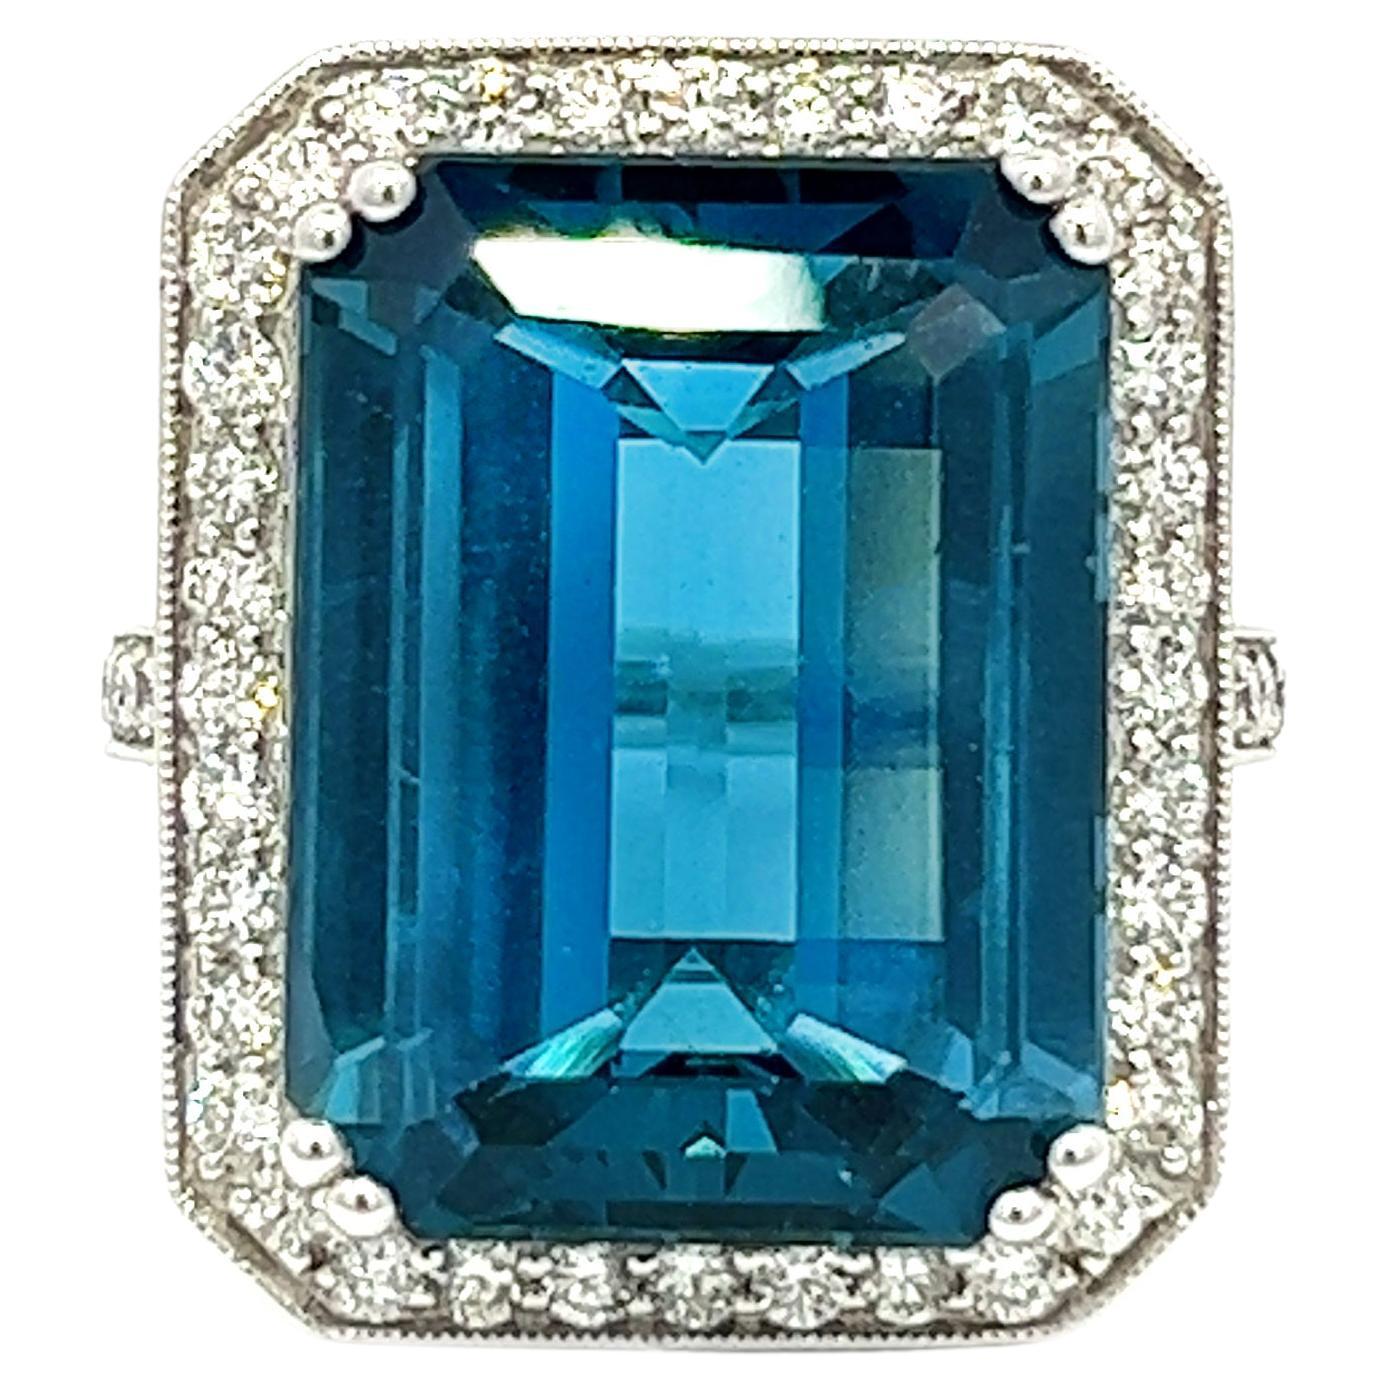 28.17CT Total Weight London Blue Topaz & Diamonds Ring, set in 14KW